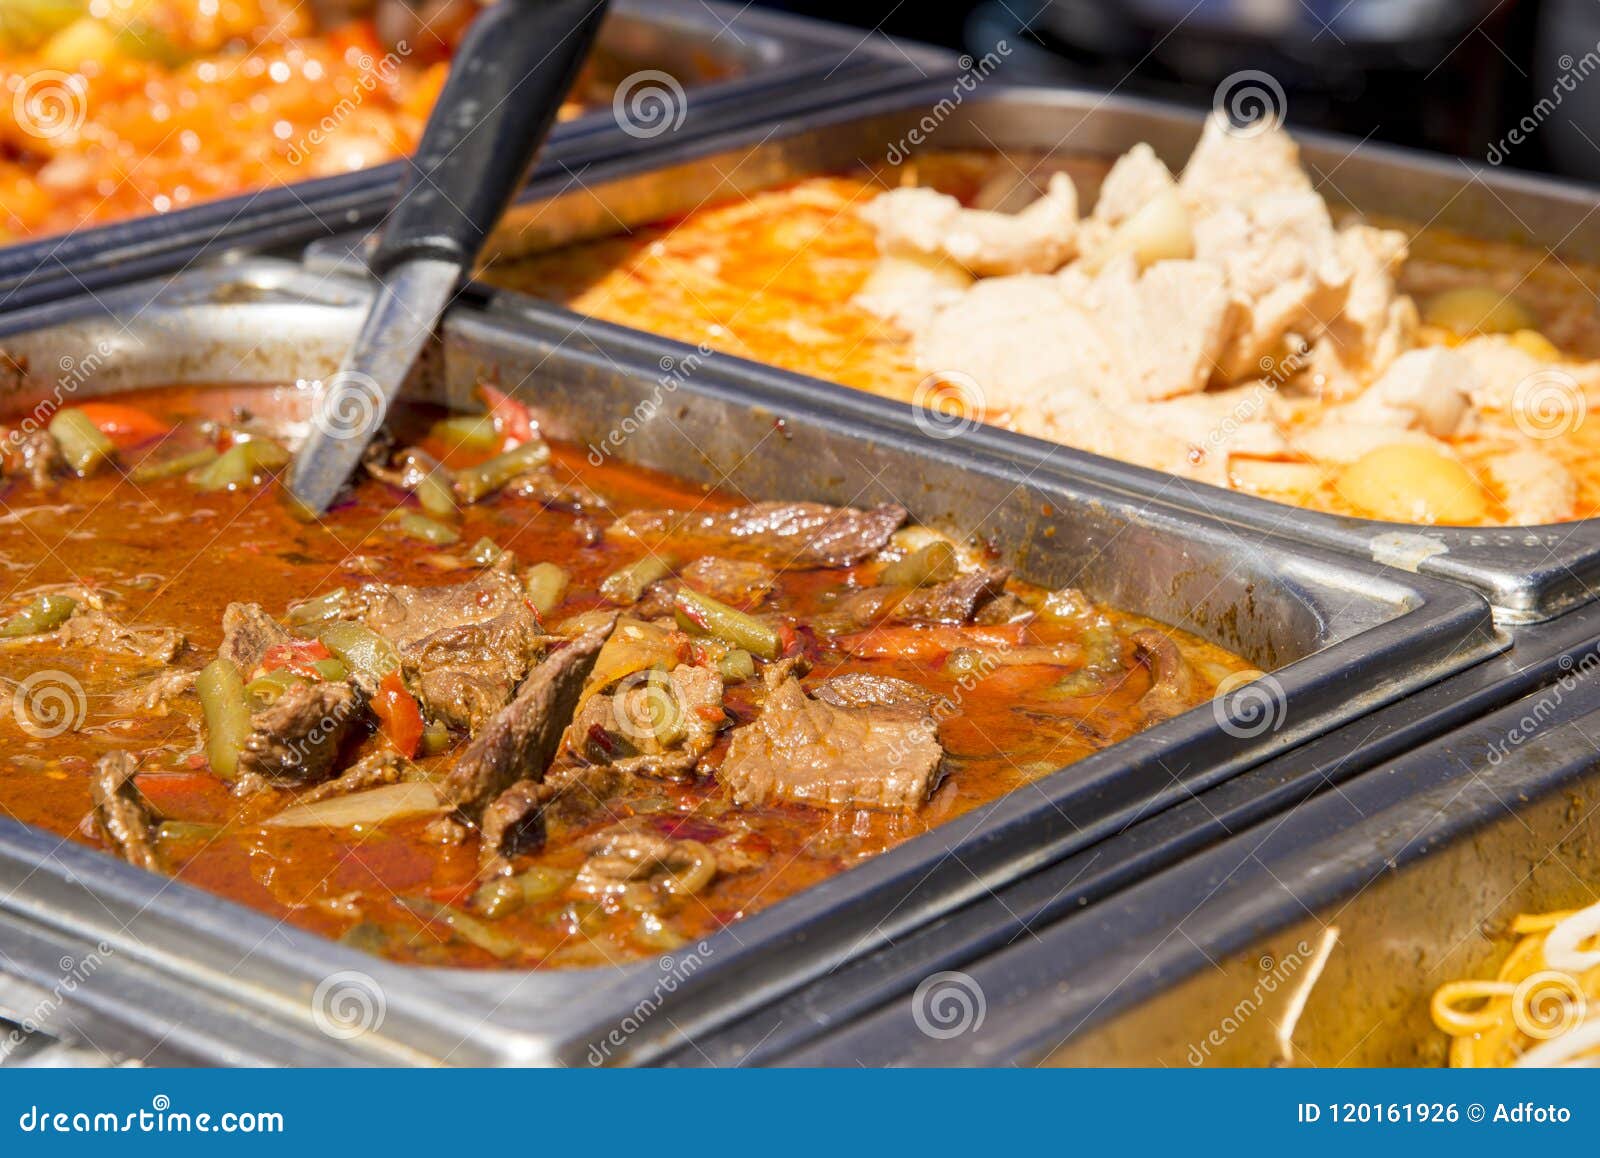 Popular Asian Street Food Dishes Stock Photo Image Of Fresh